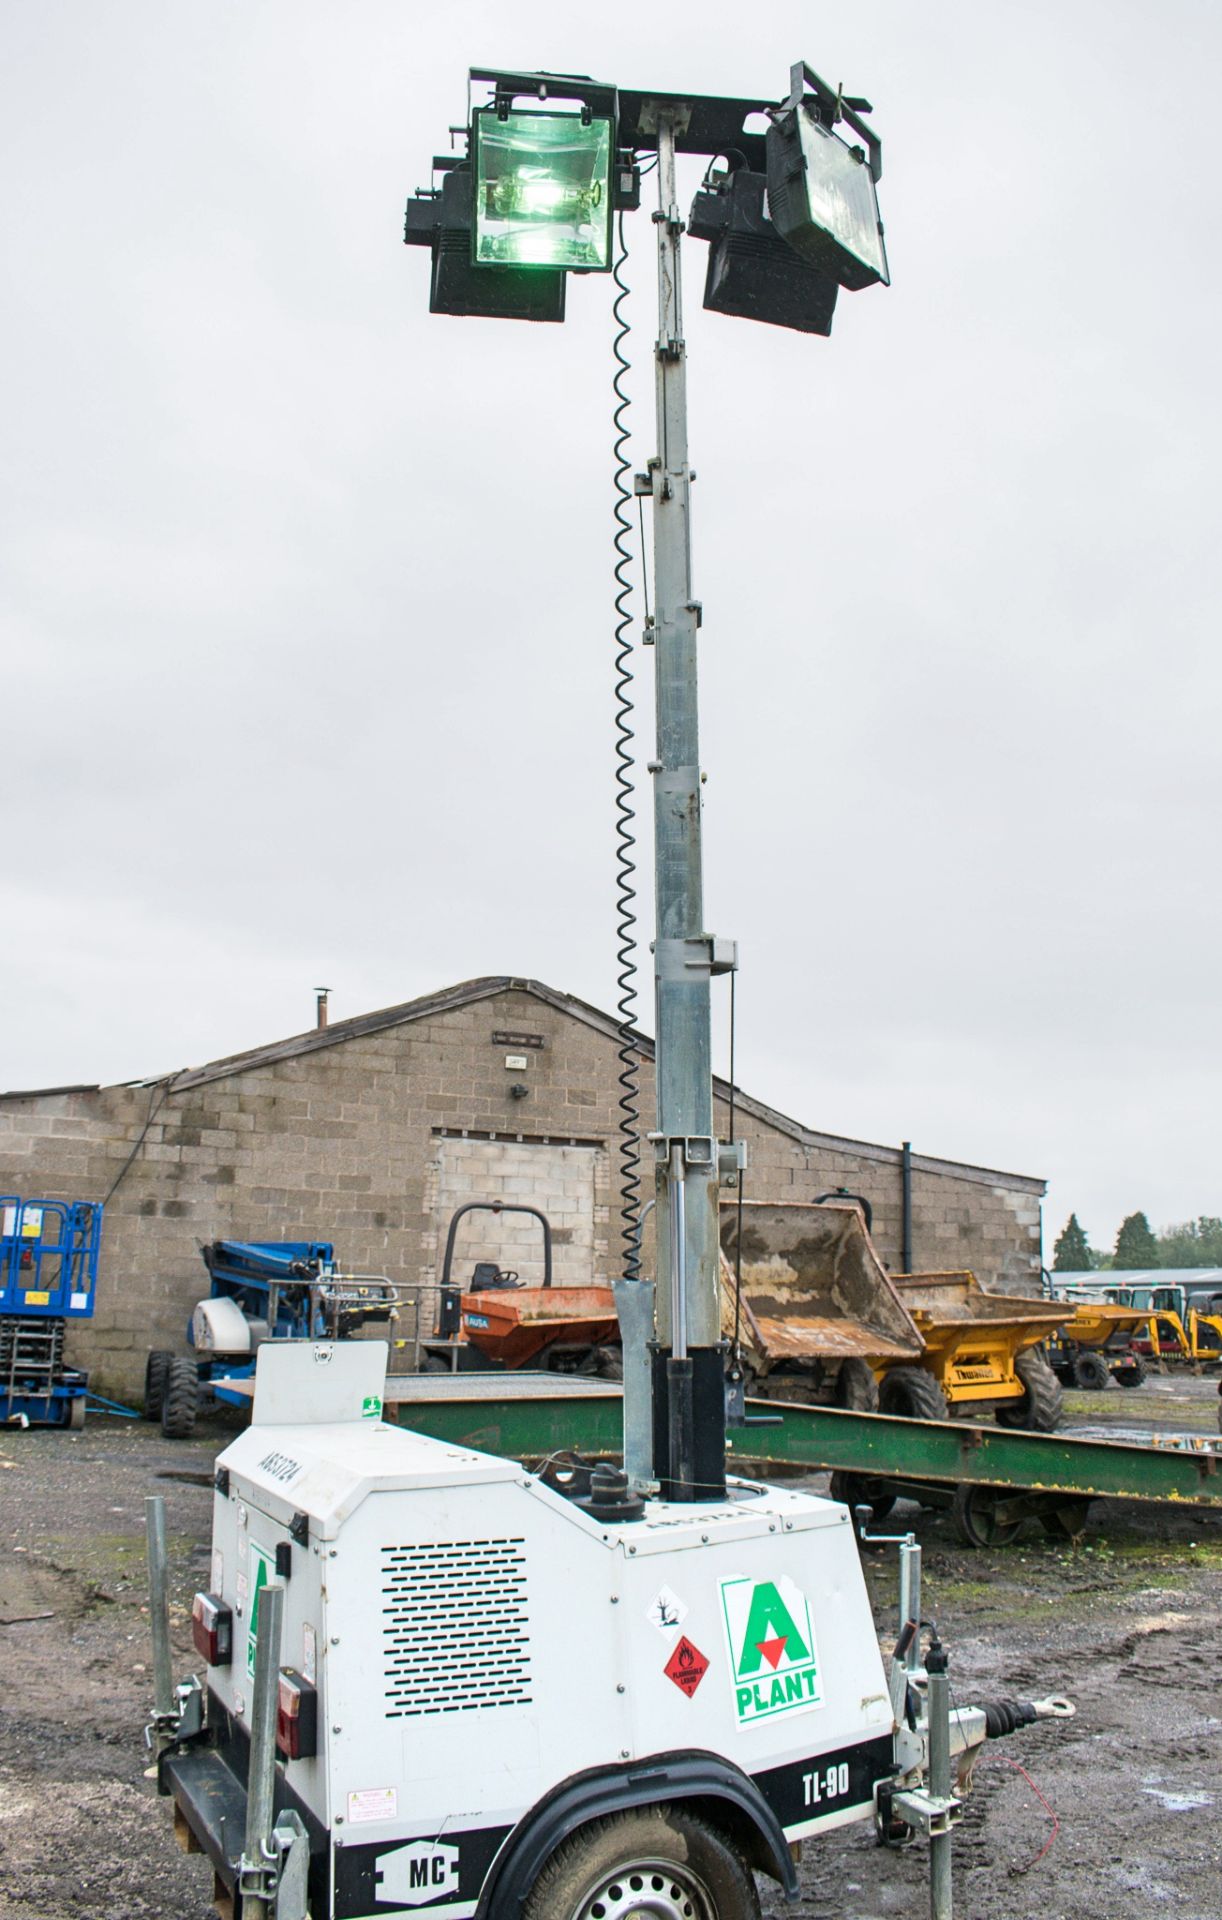 SMC TL-90 diesel driven mobile lighting tower Year: 2014 S/N: 1411151 Recorded Hours: 2394 A653724 - Image 5 of 8